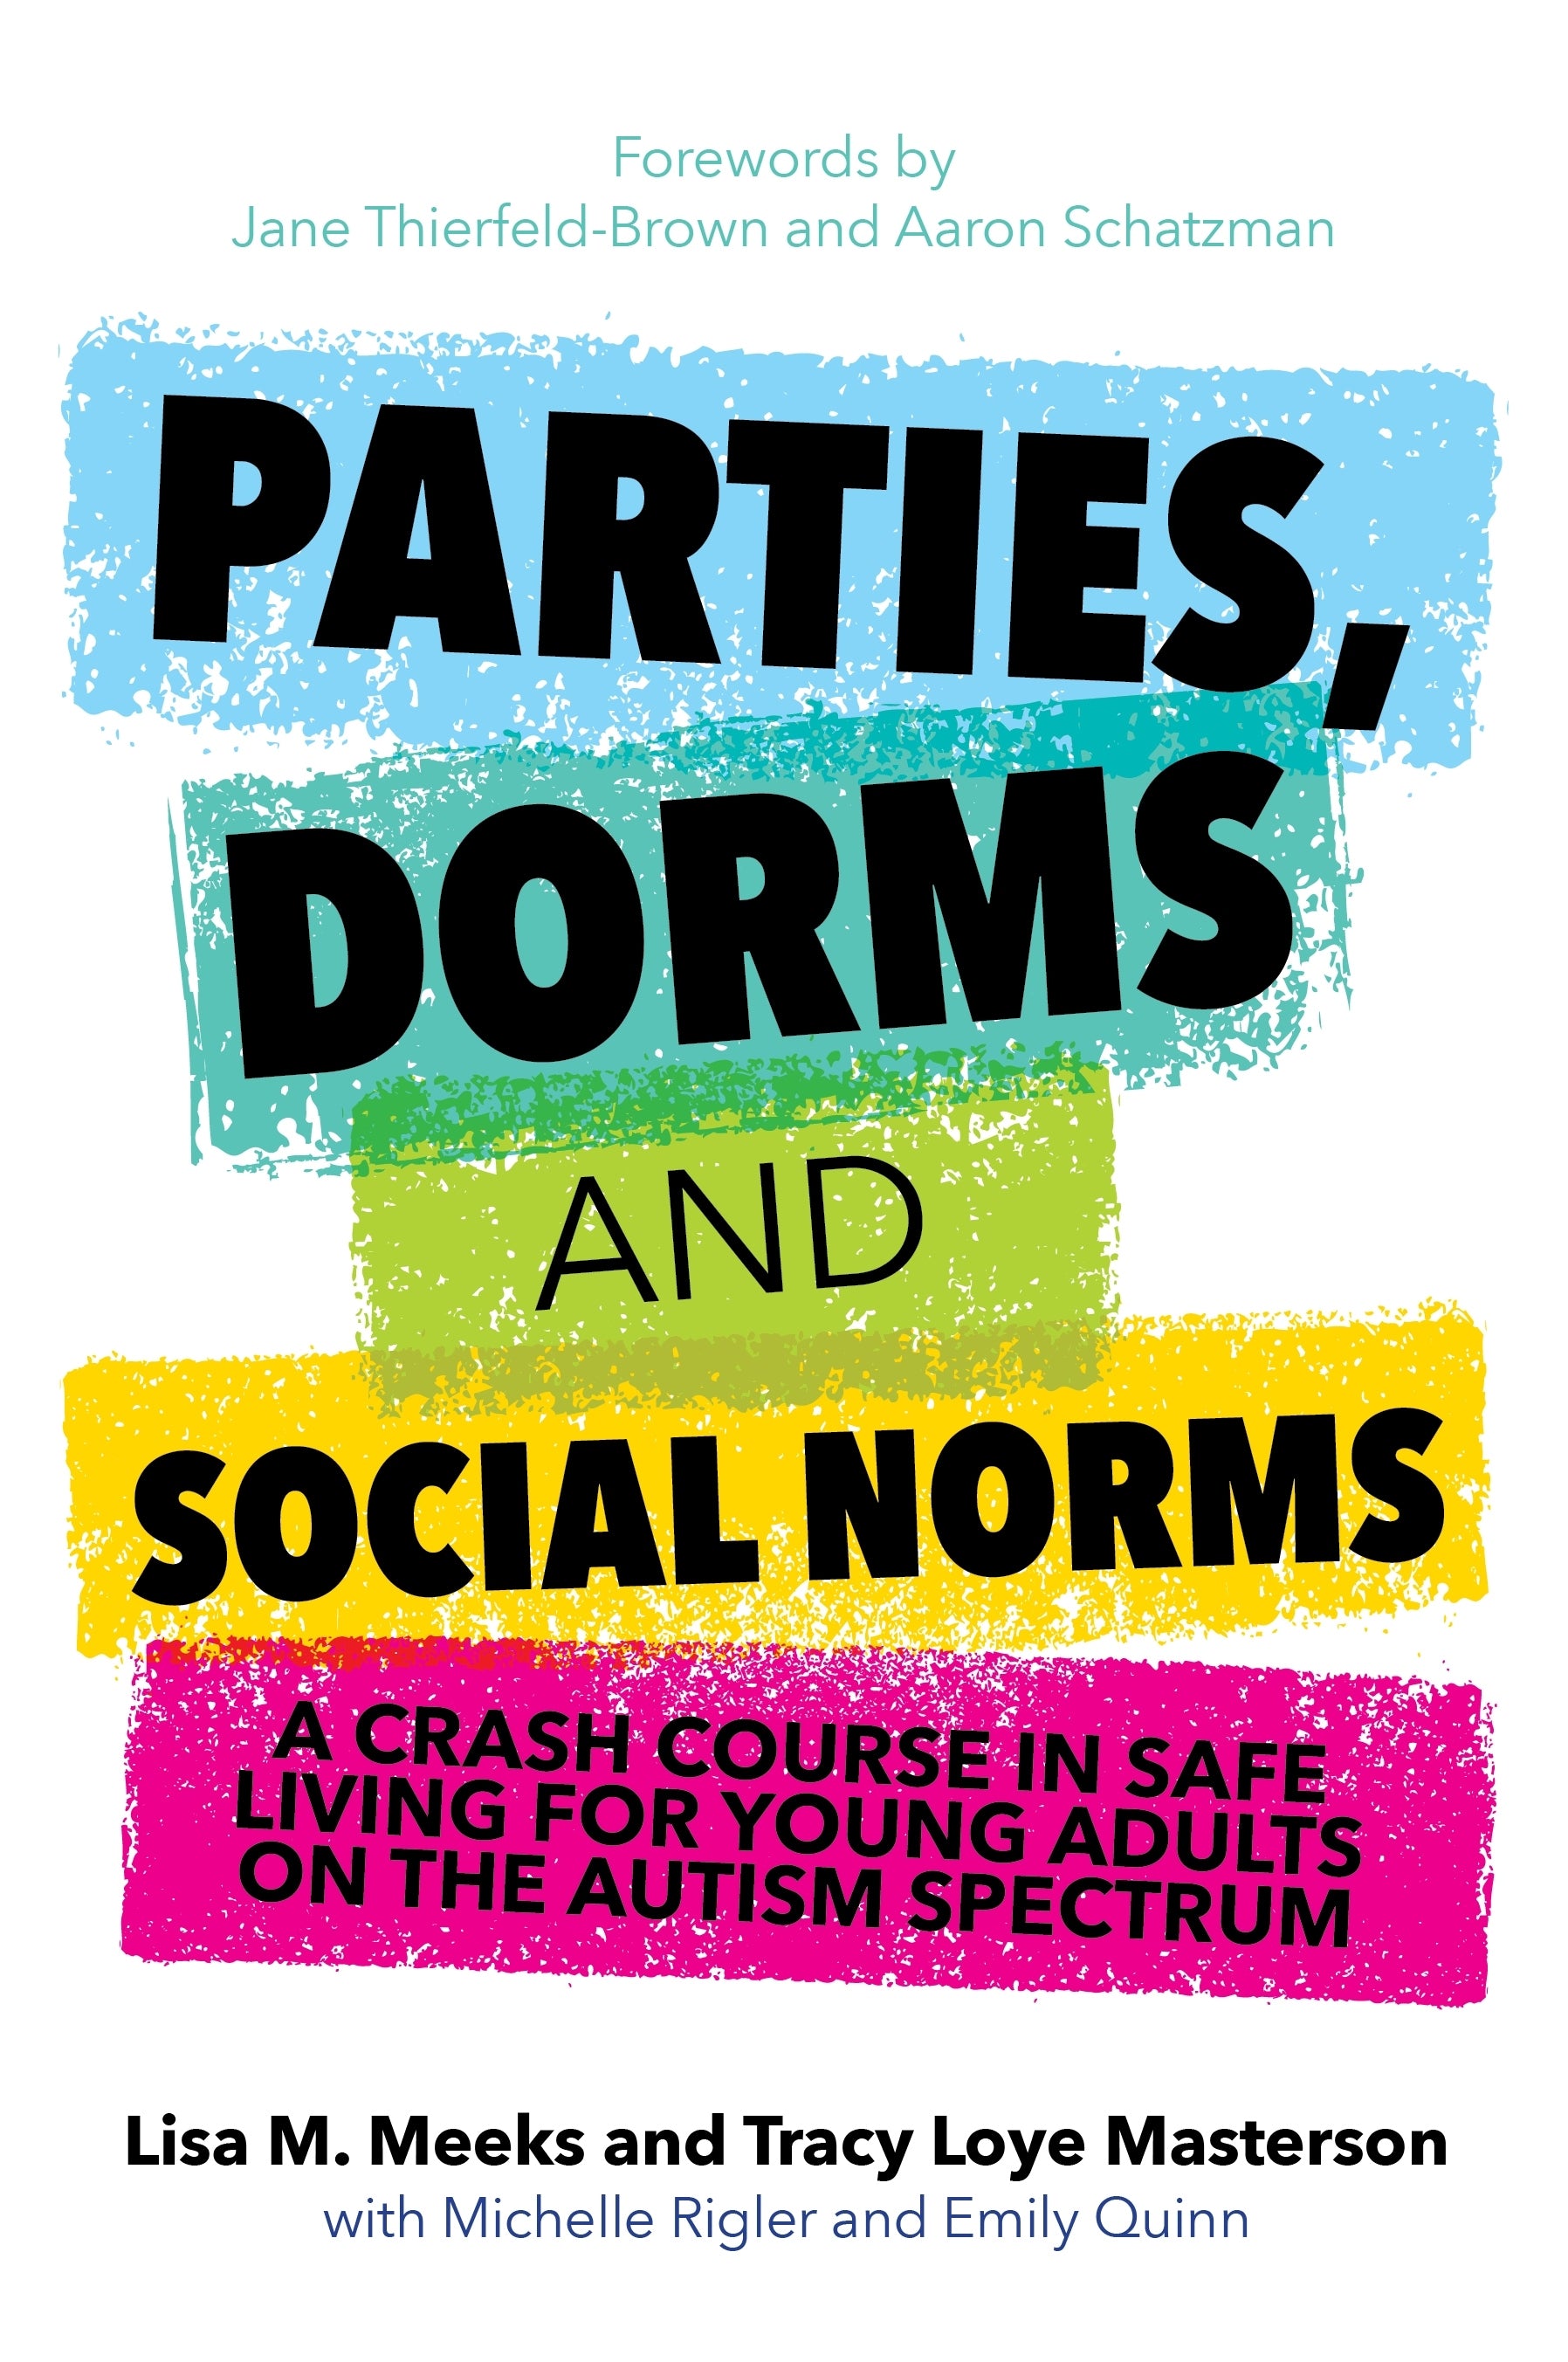 Parties, Dorms and Social Norms by Amy Rutherford, Jane Thierfeld-Brown, Aaron Schatzman, Lisa M. Meeks, Tracy Loye Masterson